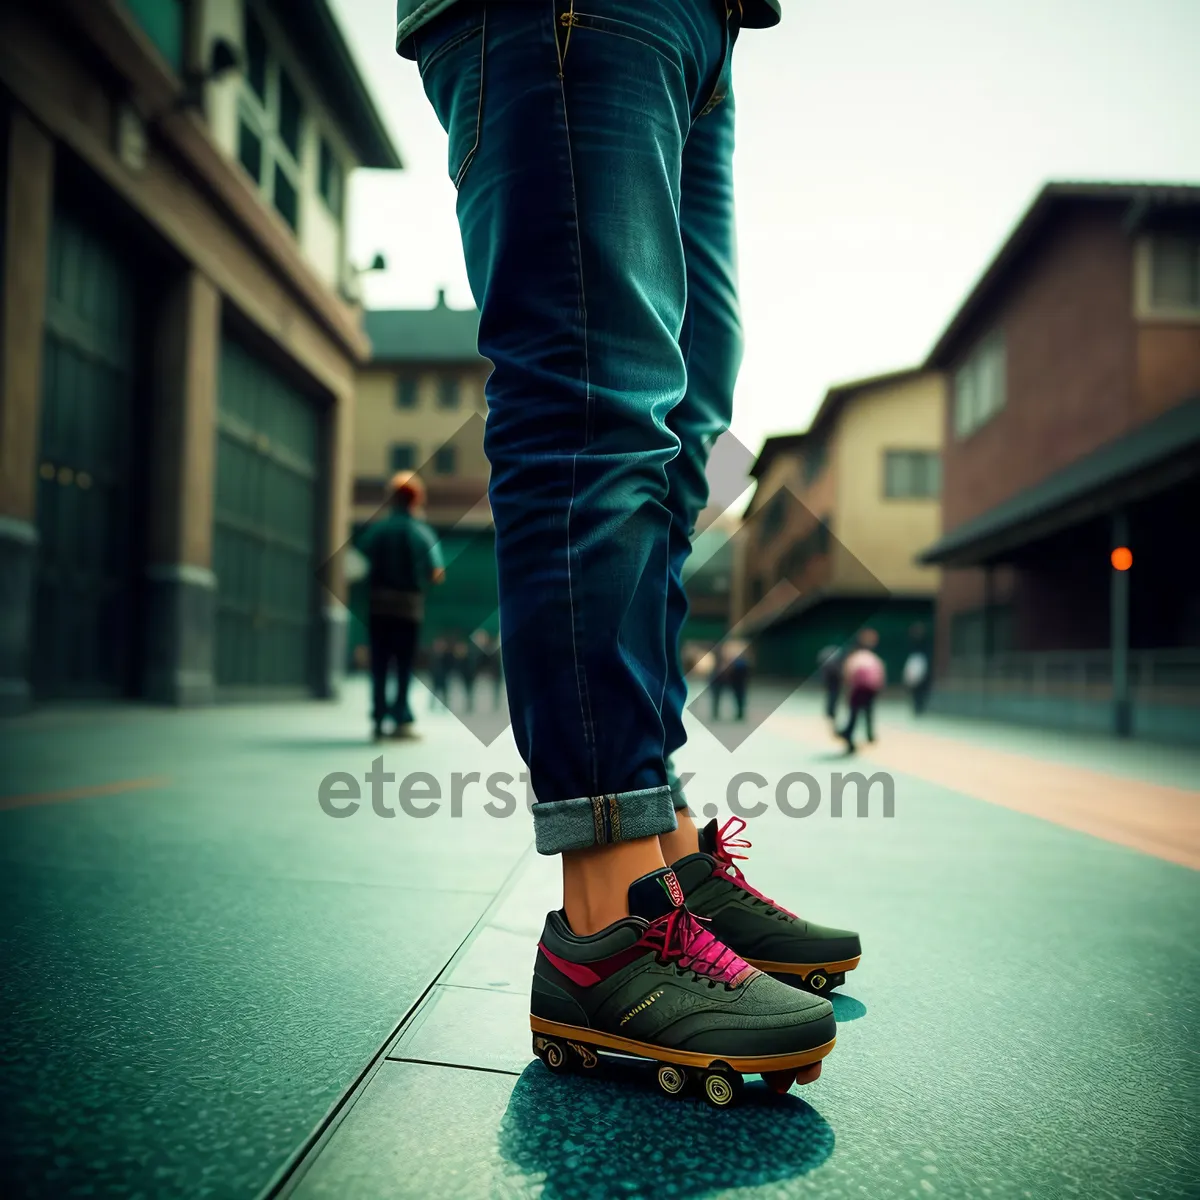 Picture of Skateboarding through the city streets with style.